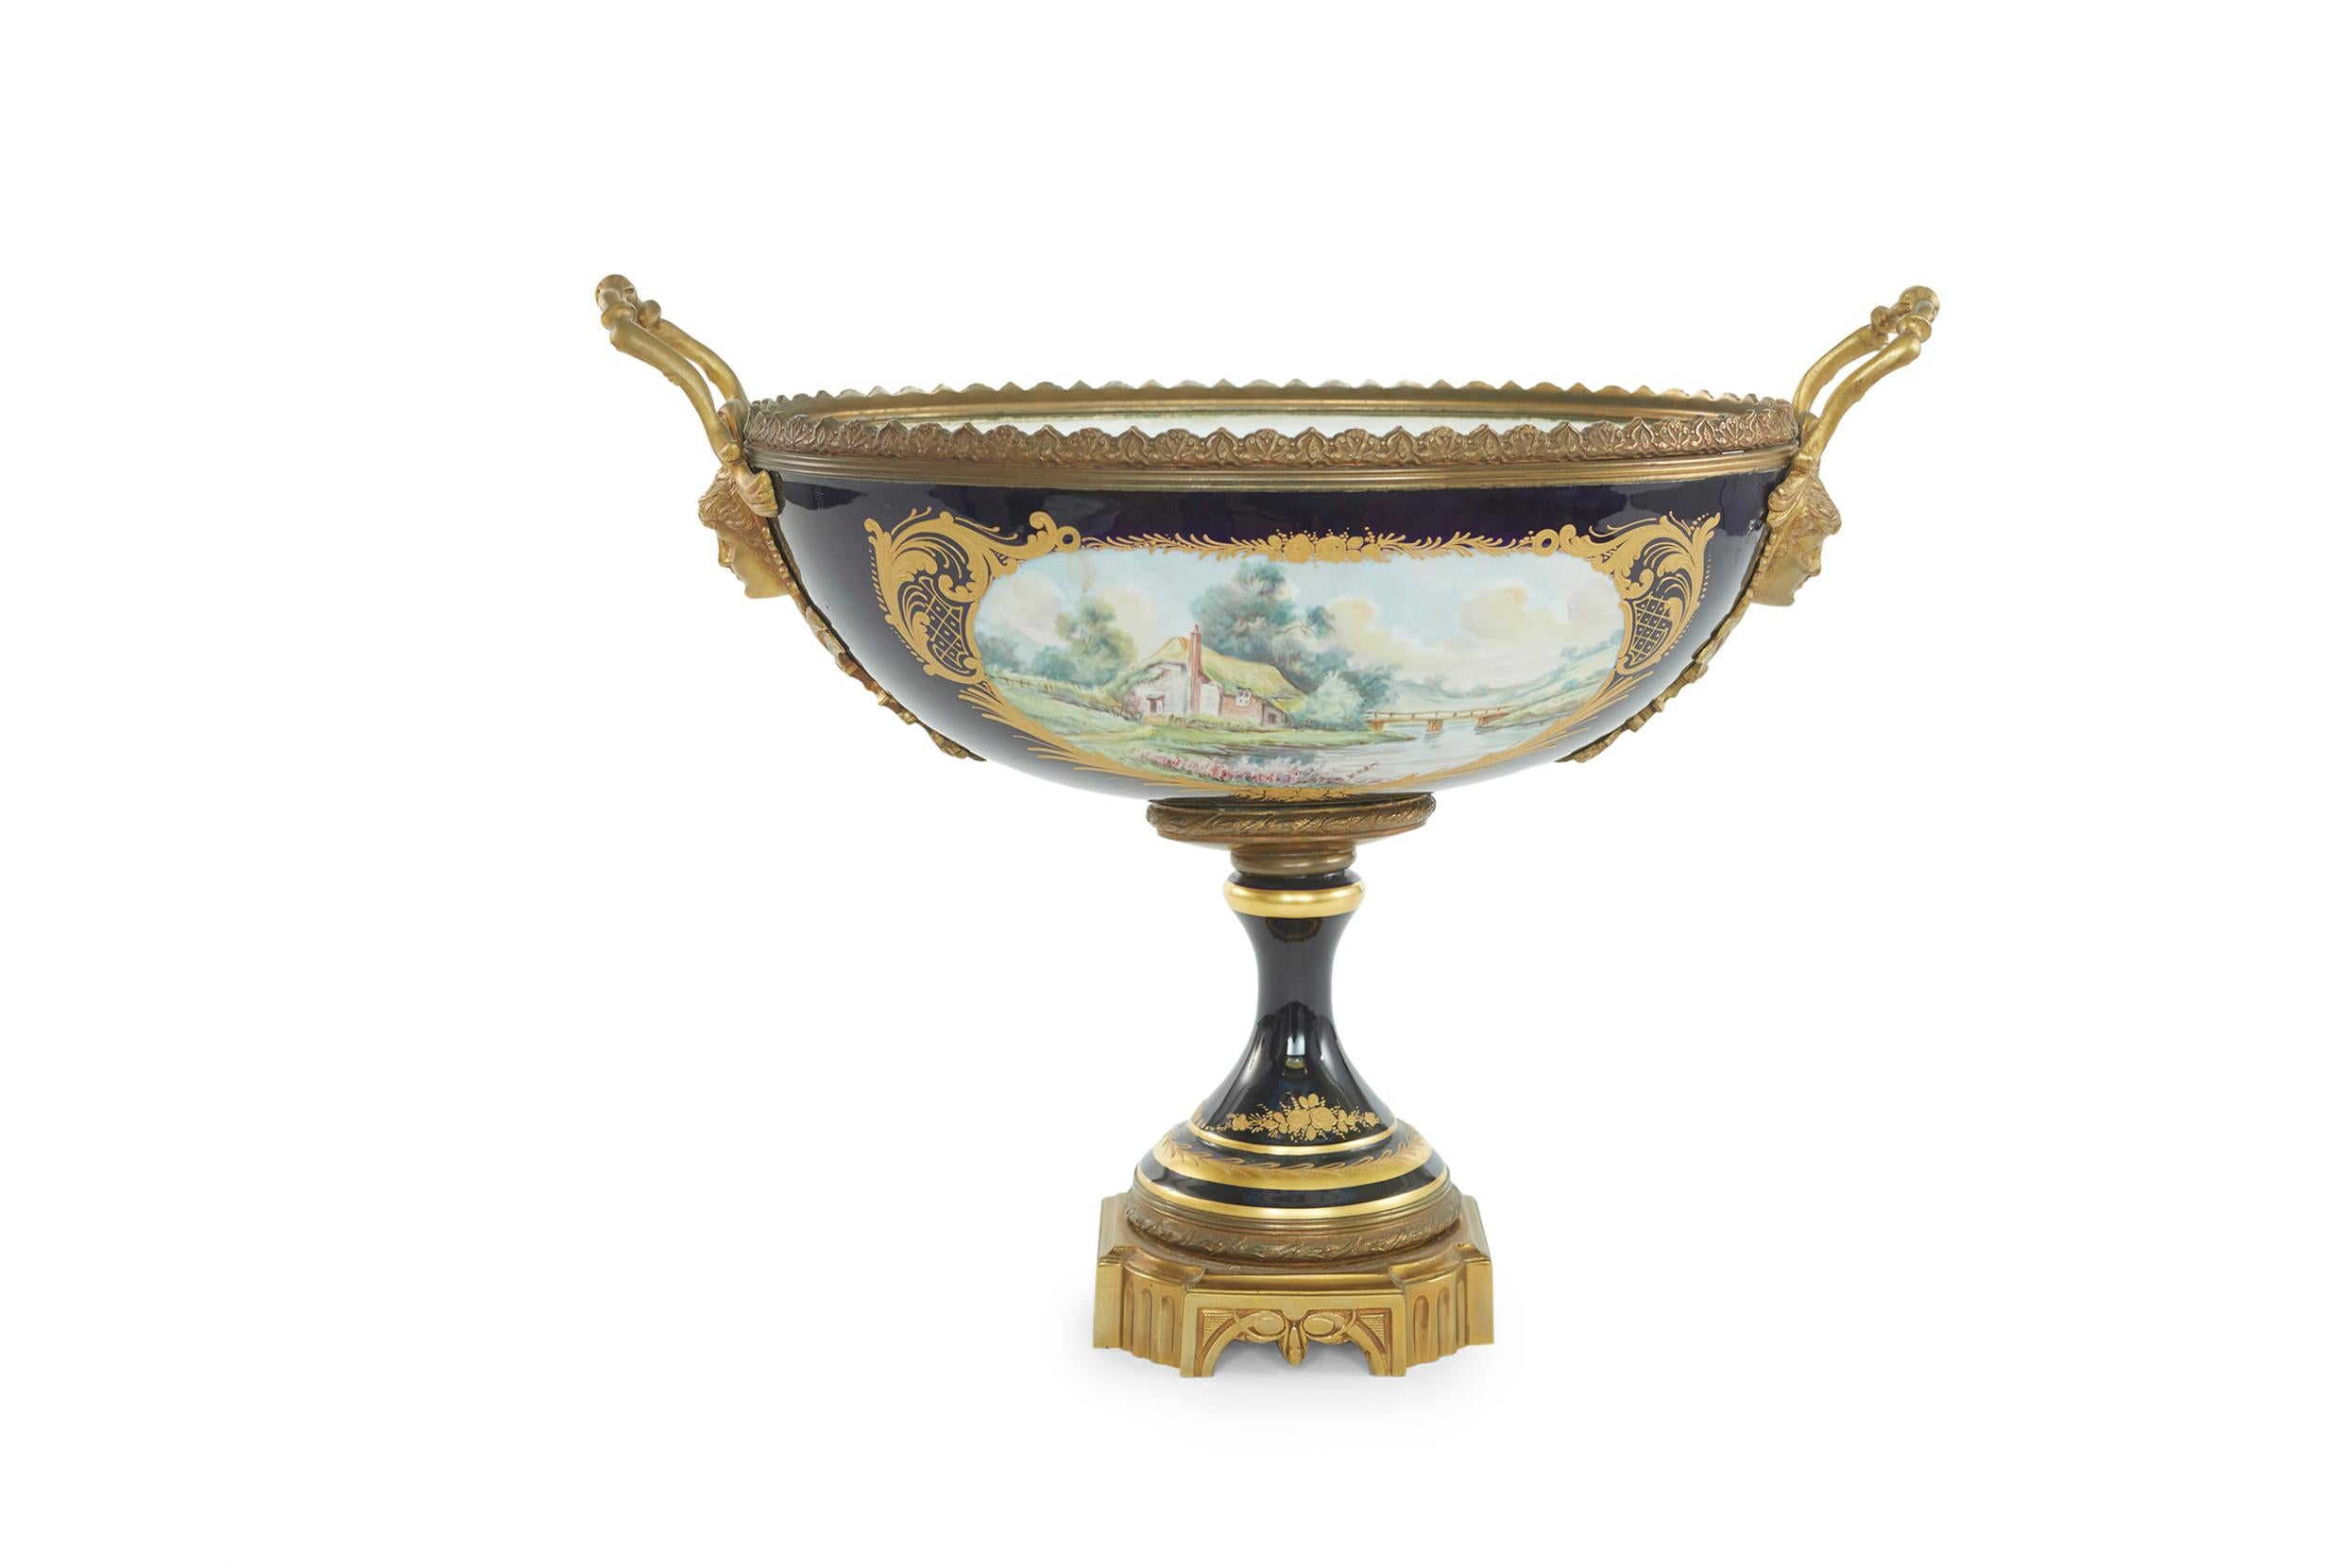 19th Century gilt bronze mounted Sevres porcelain enameled decorative centerpiece. The piece is in great condition. Minor wear appropriate with age / use. Maker's mark undersigned. The centerpiece stands about 19 1/5 inched long X 10 inches wide X